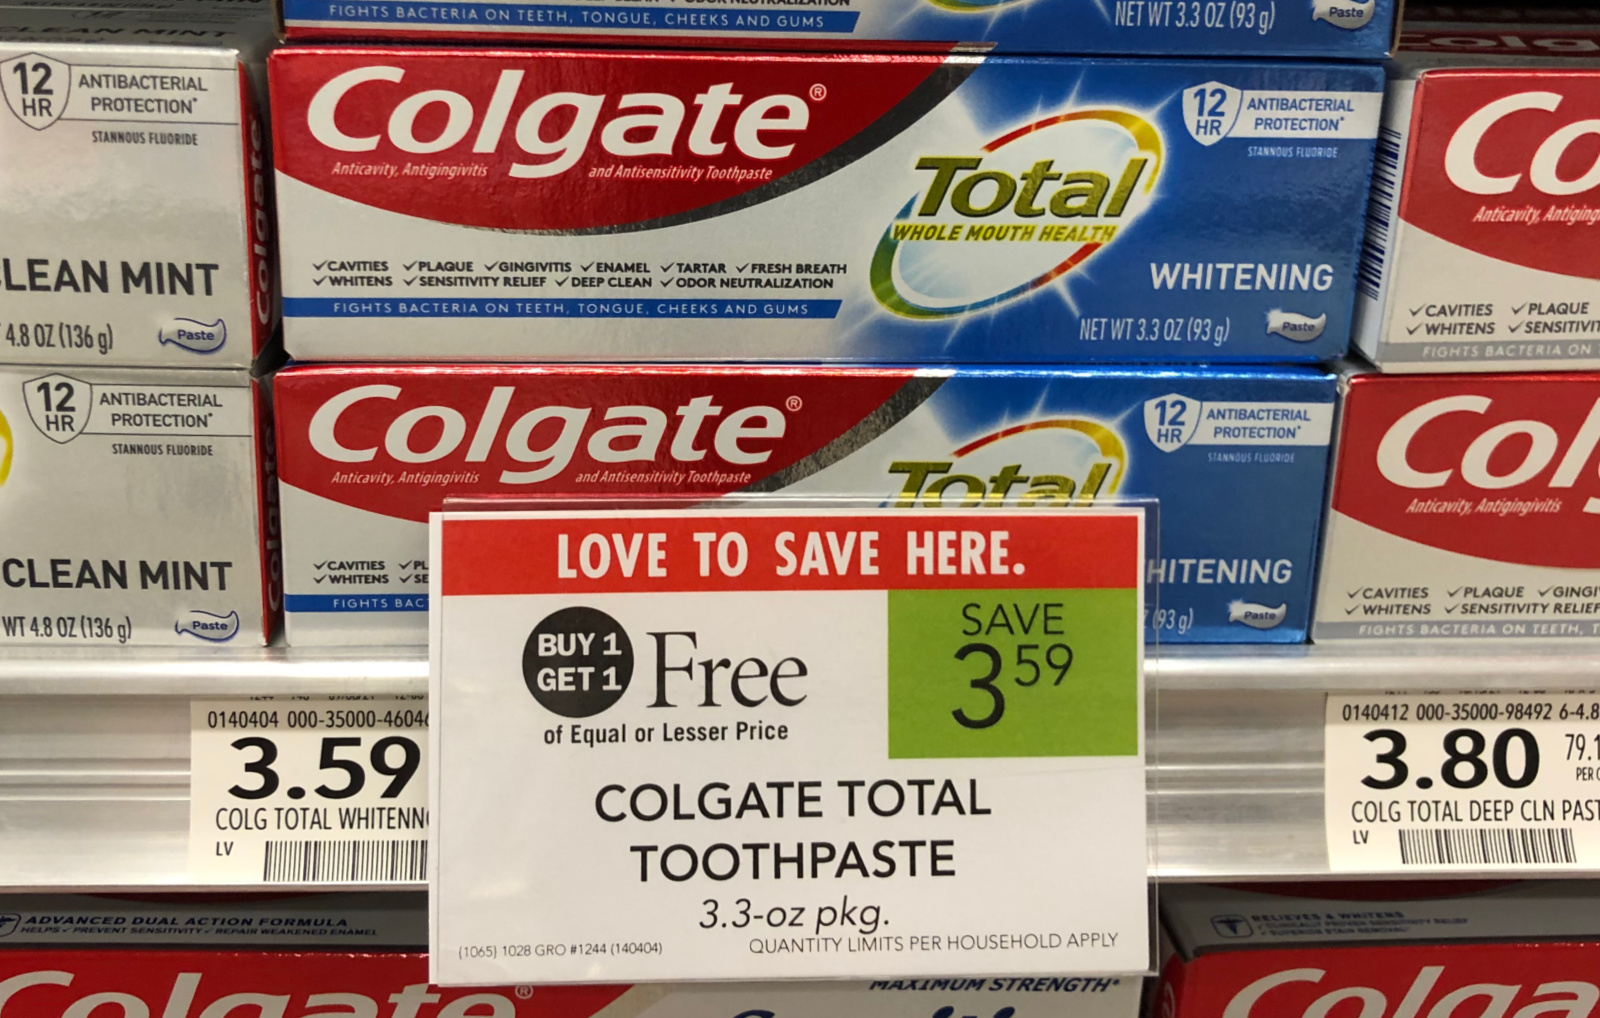 Grab Colgate Total Toothpaste As Low As FREE At Publix on I Heart Publix